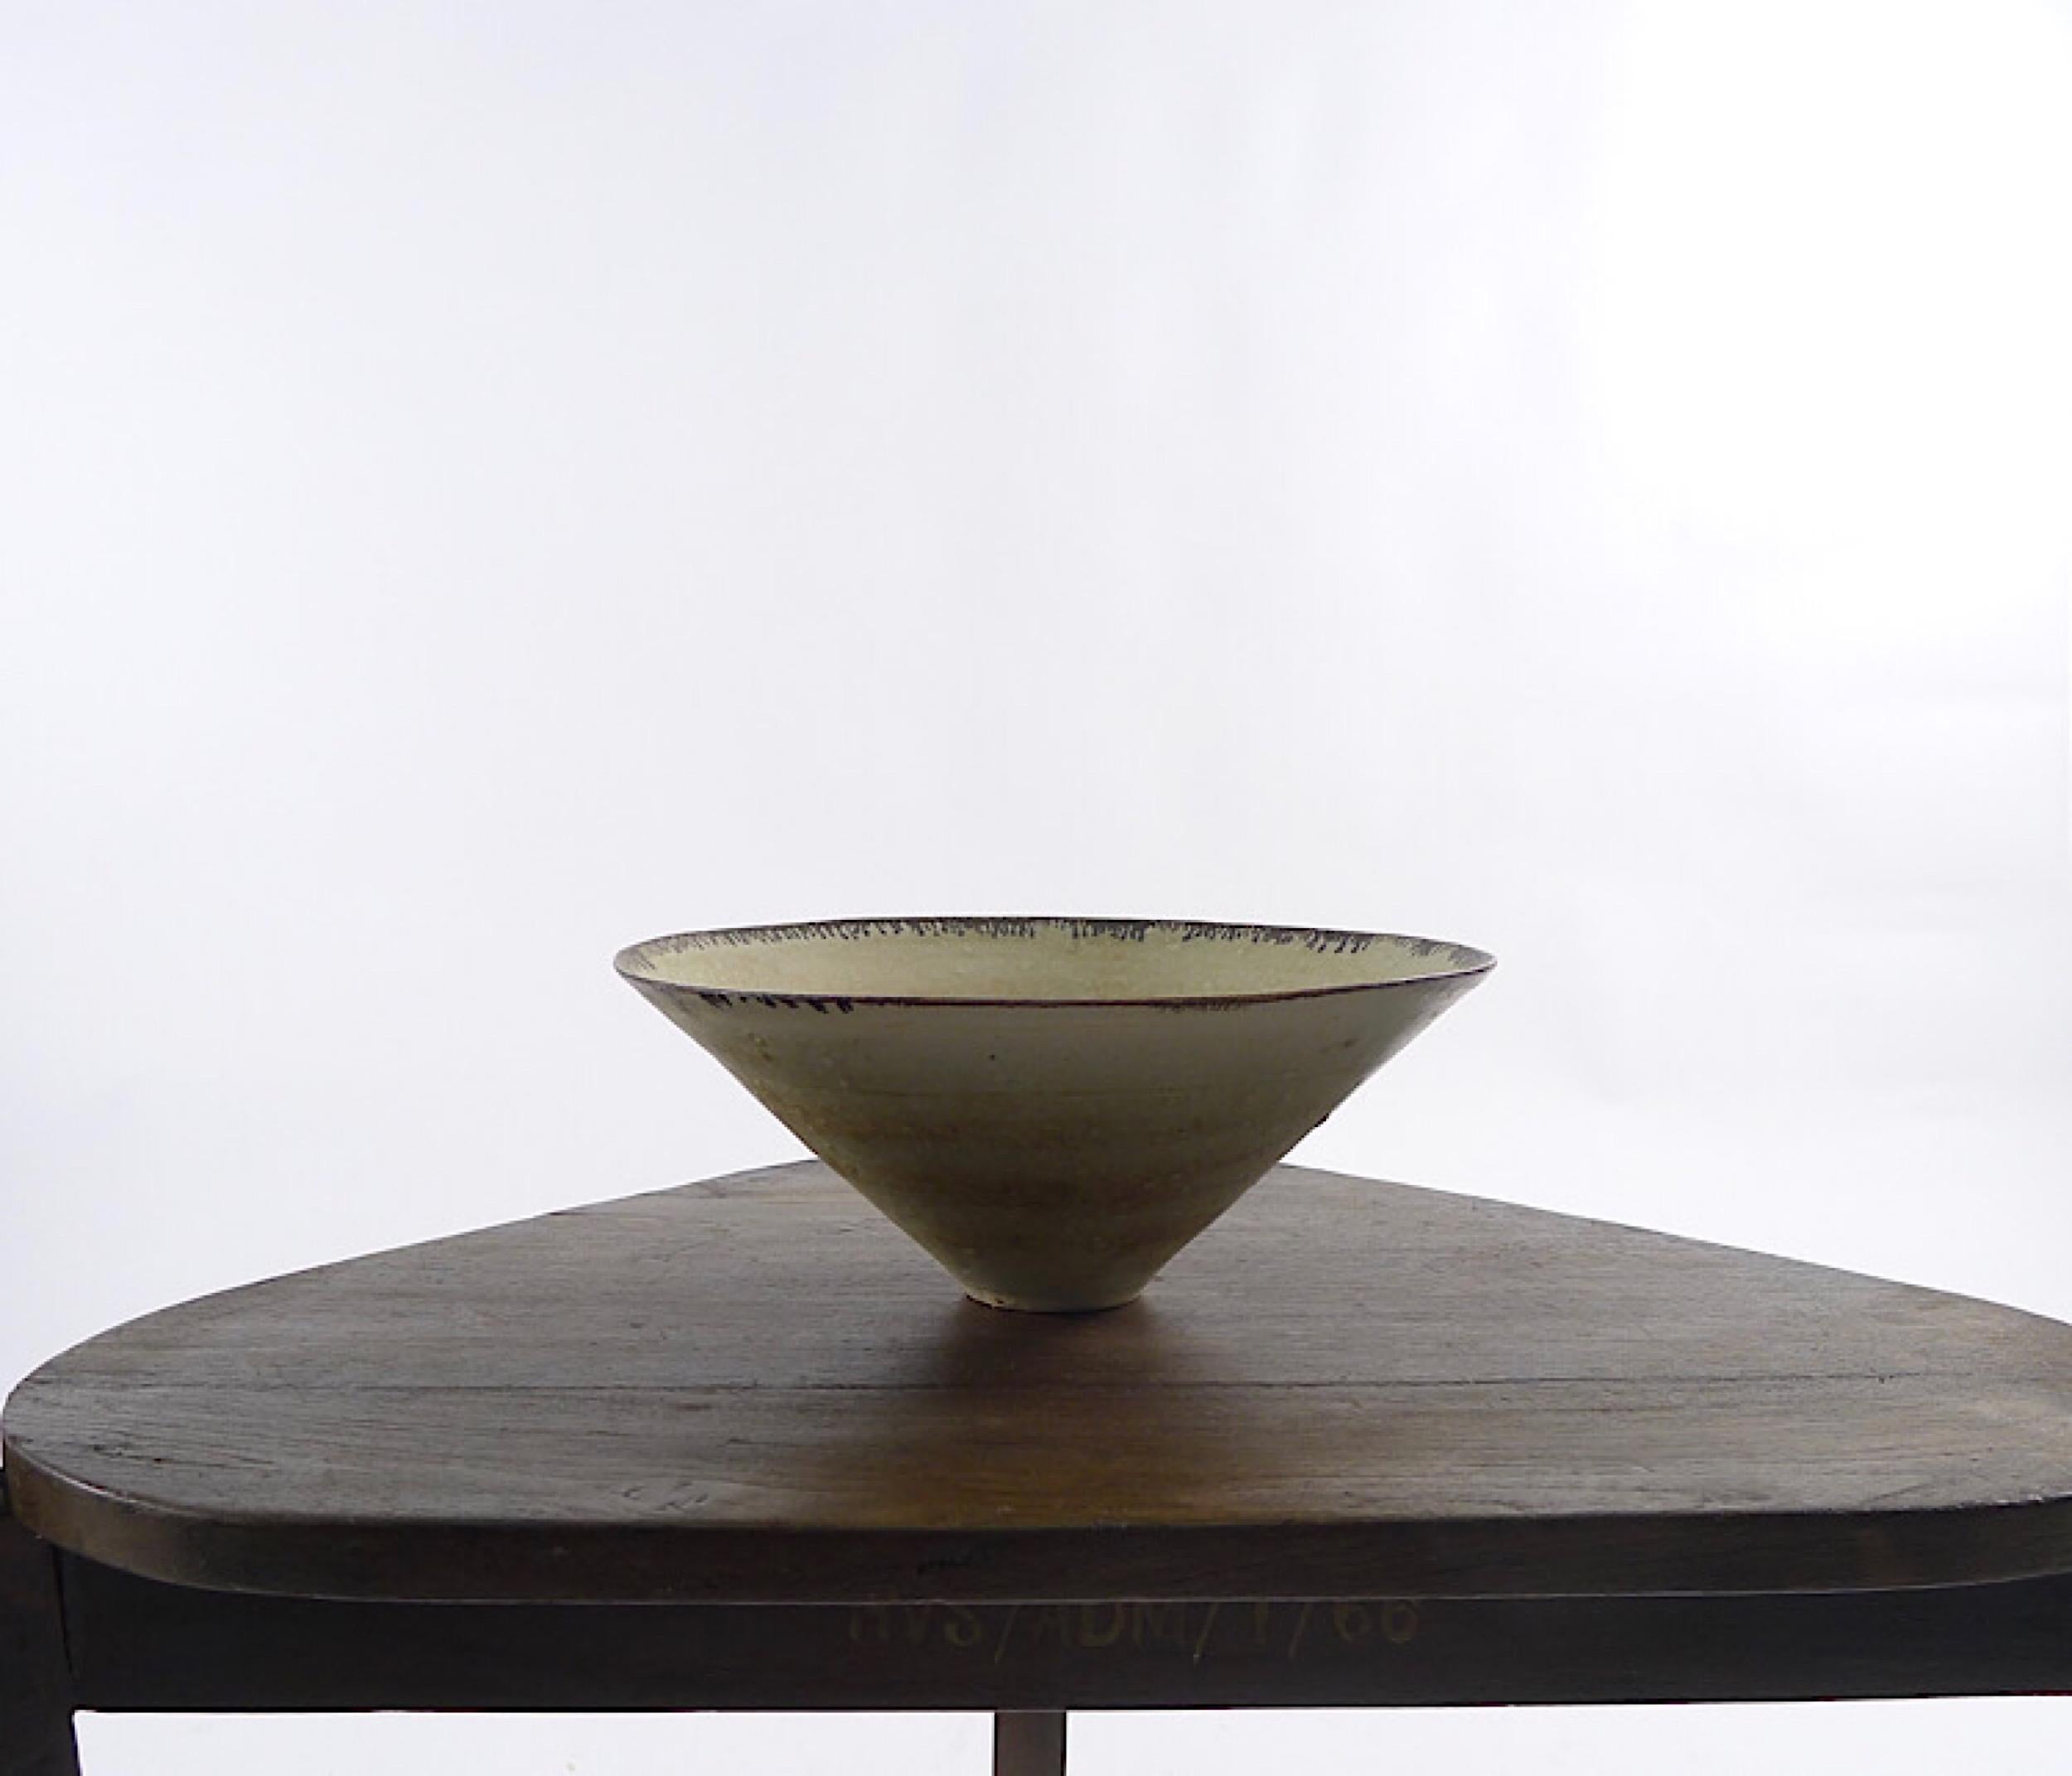 Dame Lucie Rie DBE (British/Austrian 1902-1995), porcelain bowl of flaring conical form, pitted mint blue and fawn glaze with running manganese band to rim, impressed seal mark.

Condition excellent. Measure: 24cm diameter.